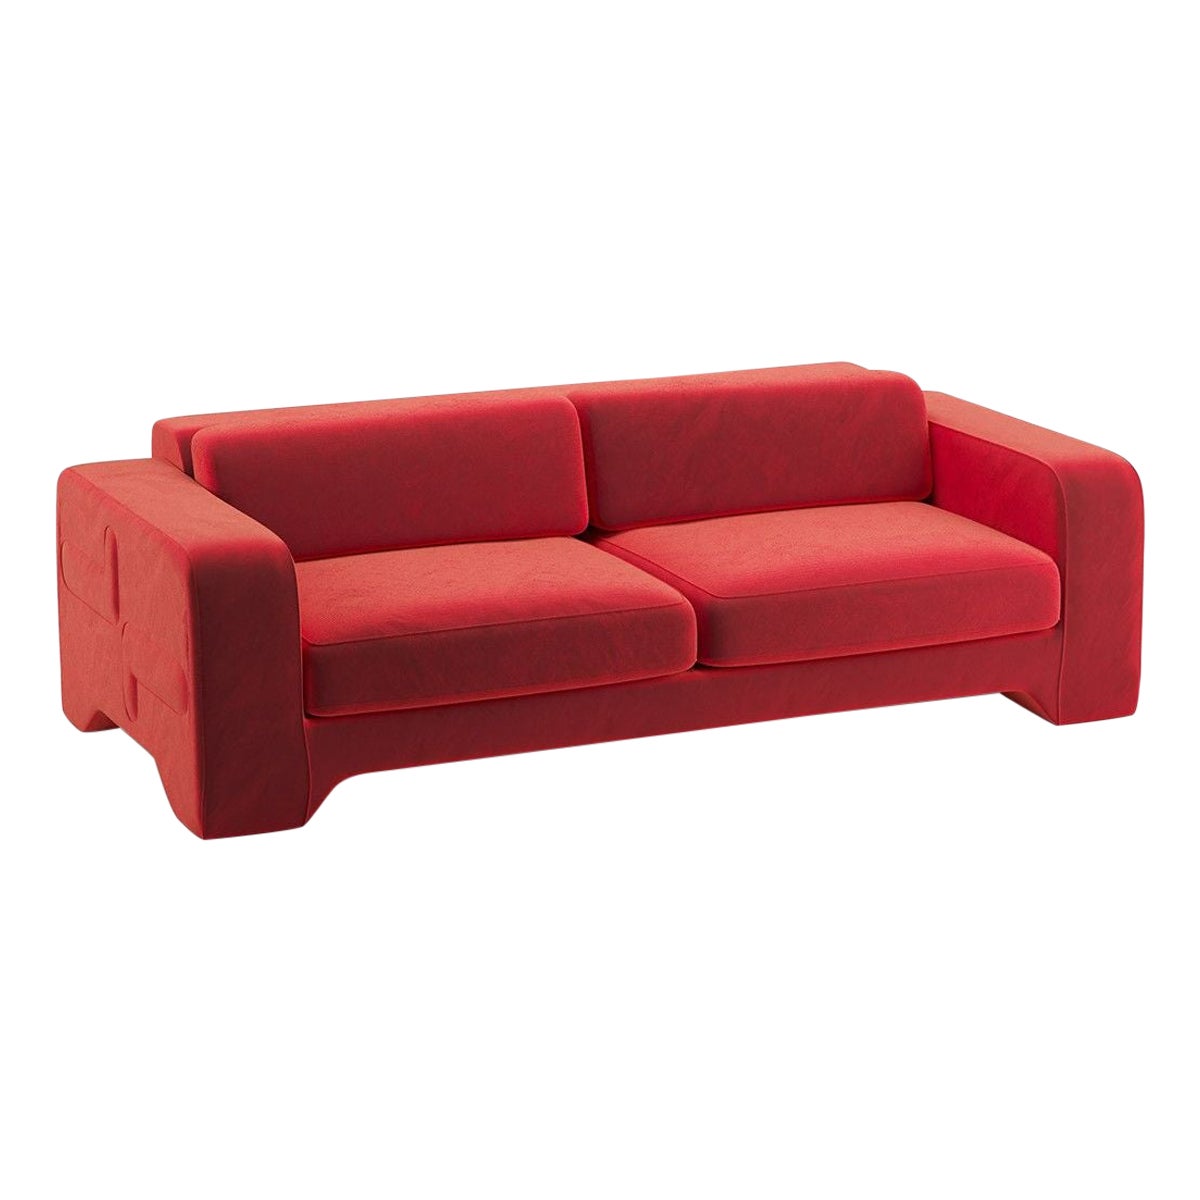 Popus Editions Giovanna 4 Seater Sofa in Orange-Red Como Velvet Upholstery For Sale